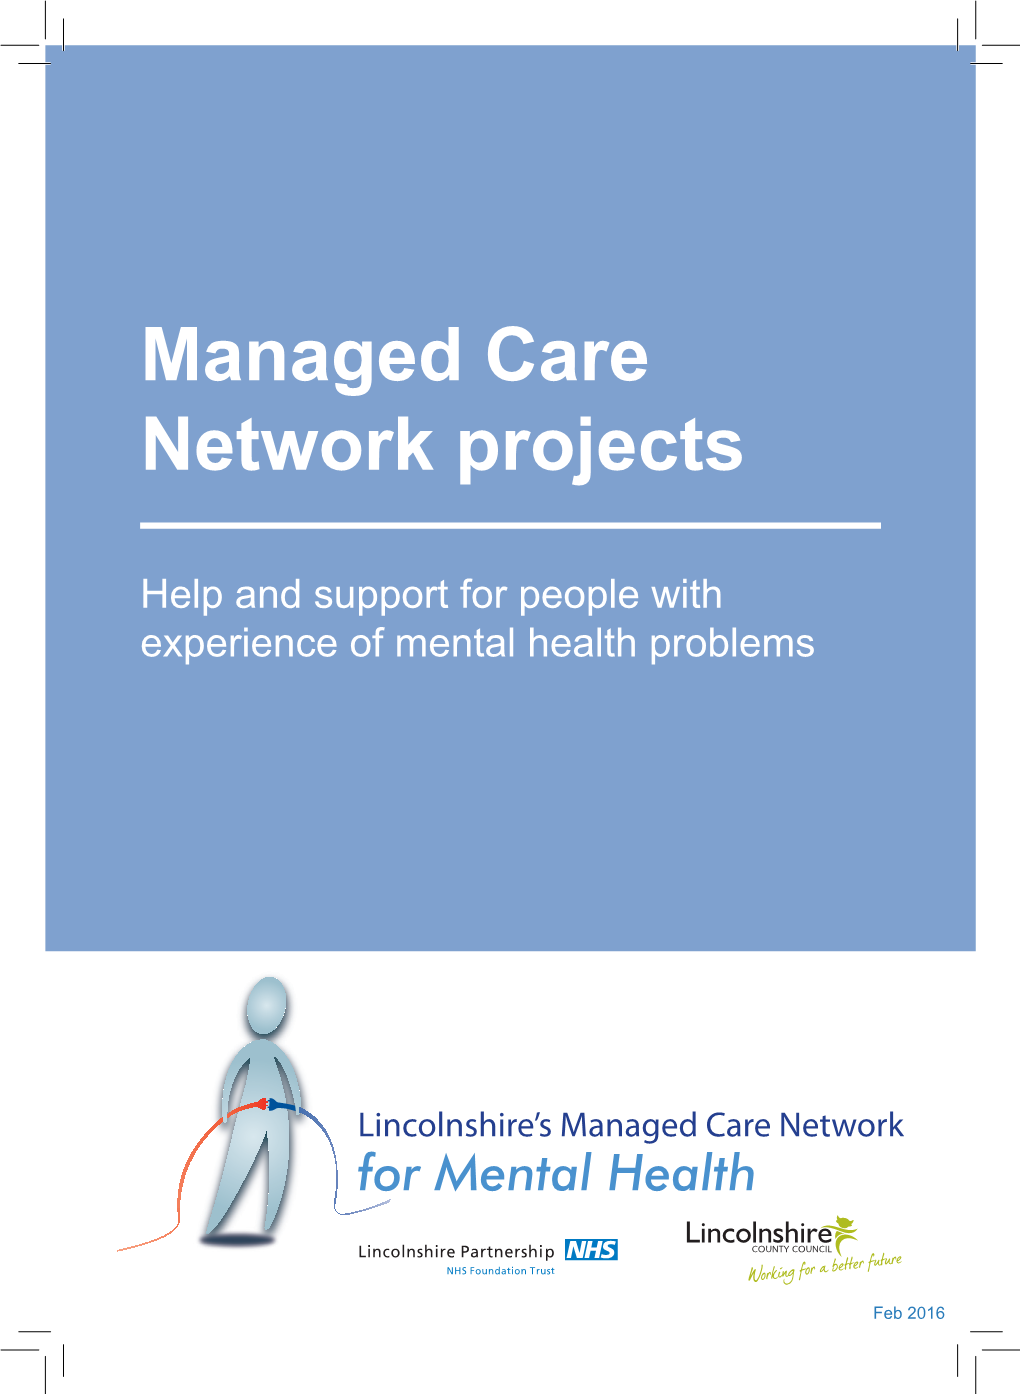 Managed Care Network Projects